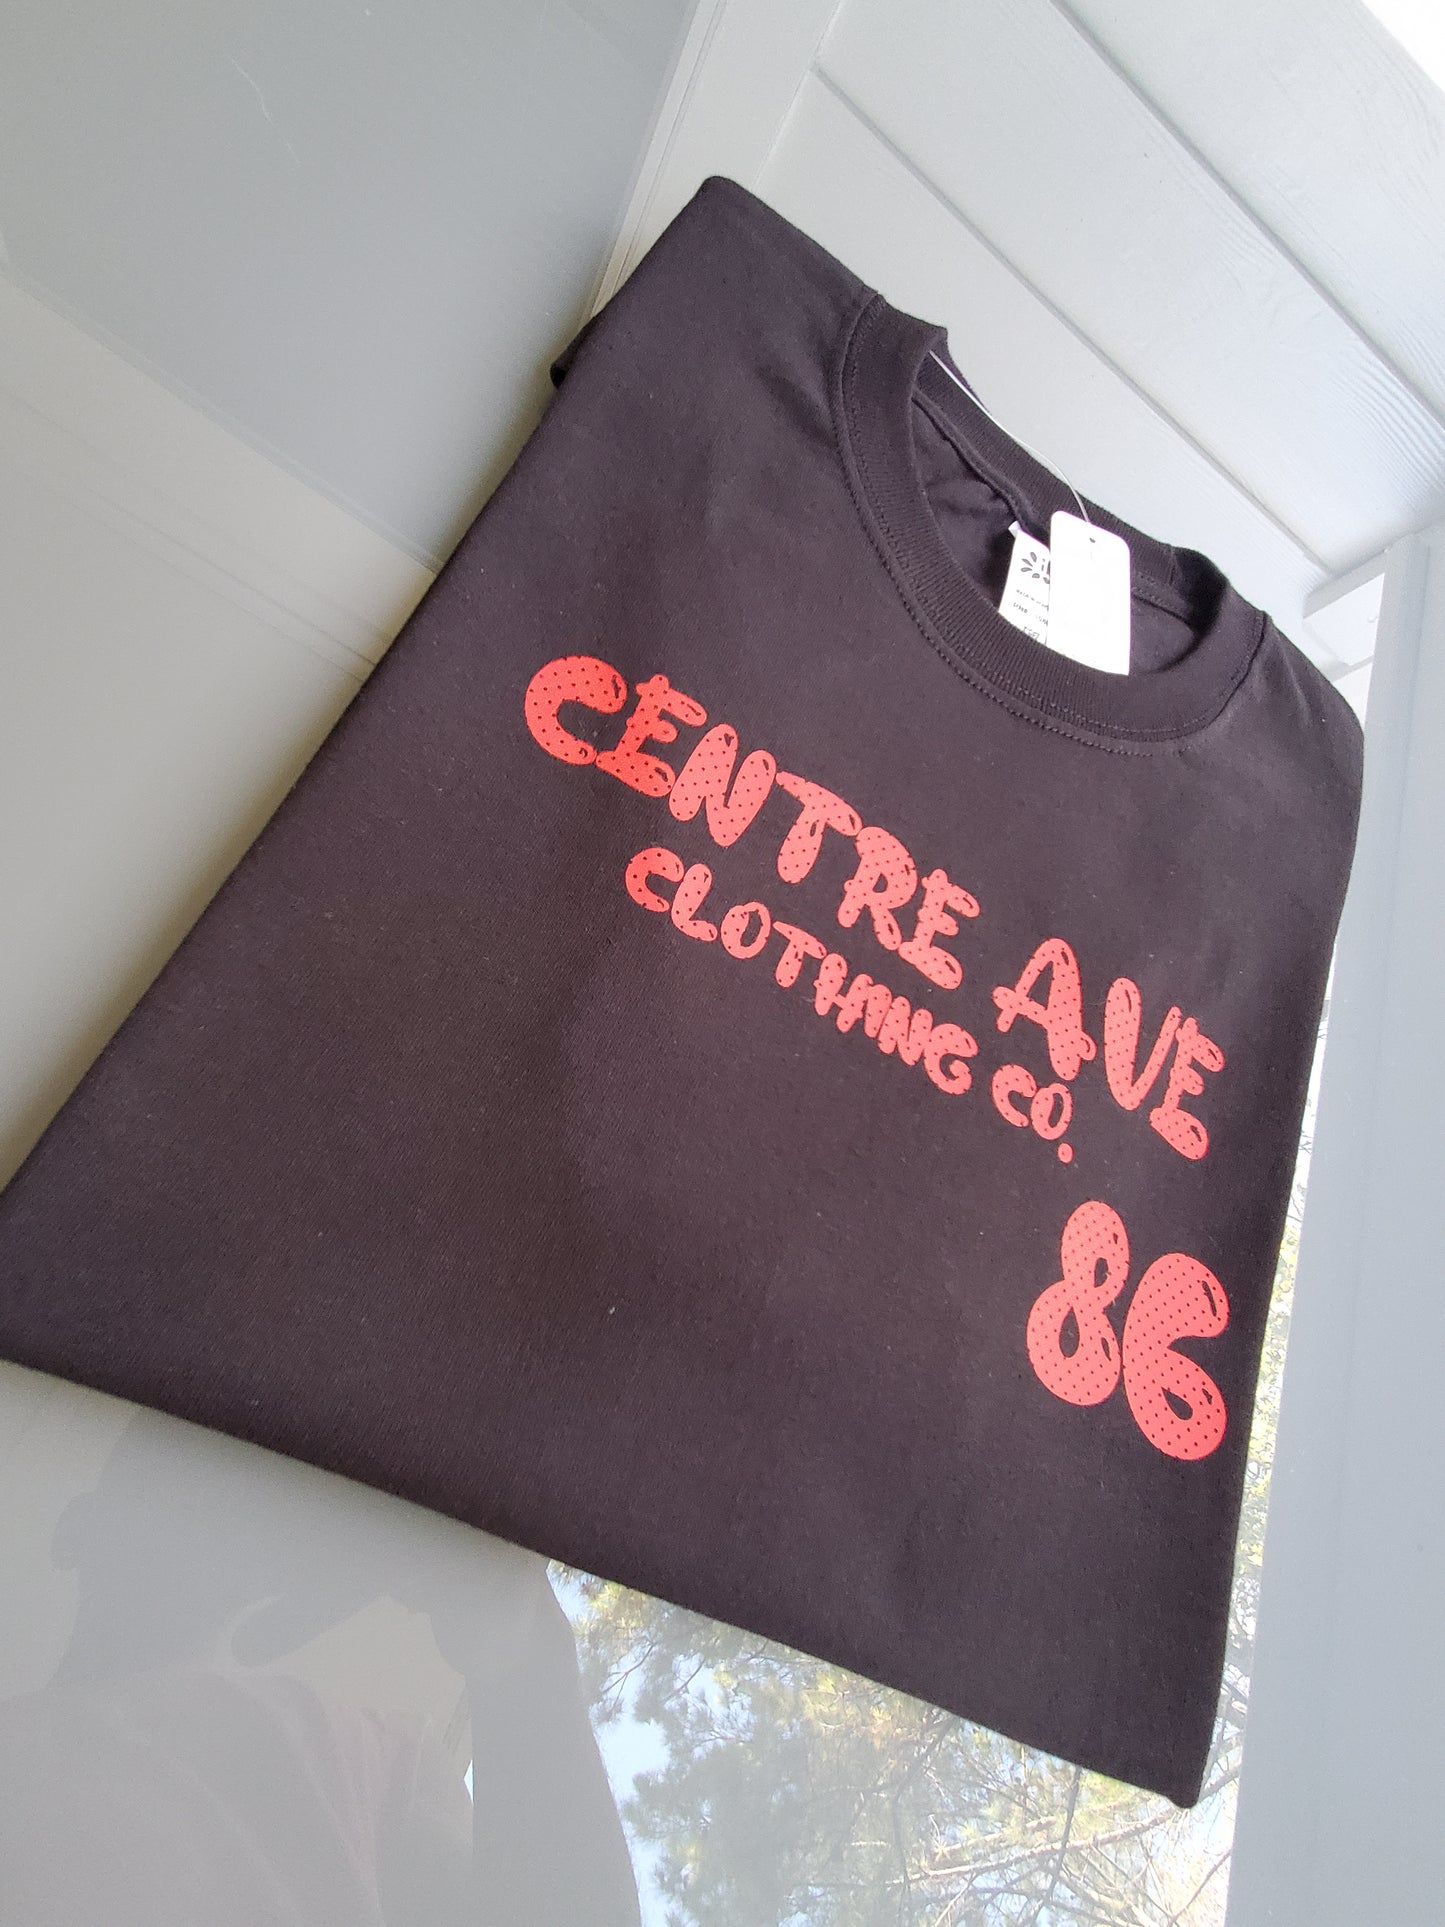 Centre Ave Ball Hard T-Shirt - Centre Ave Clothing Co.